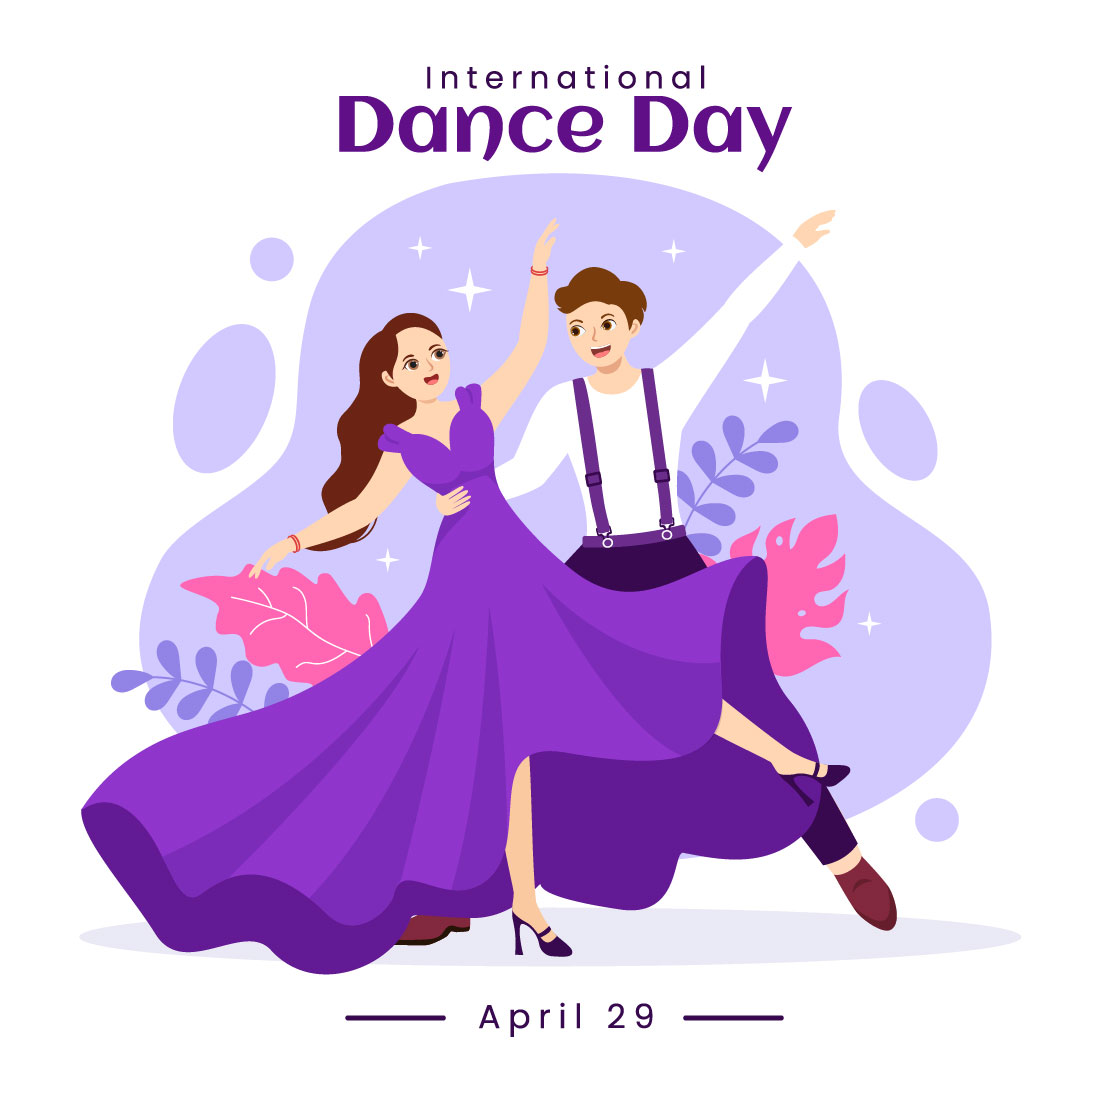 18 International Dance Day Illustration preview image.